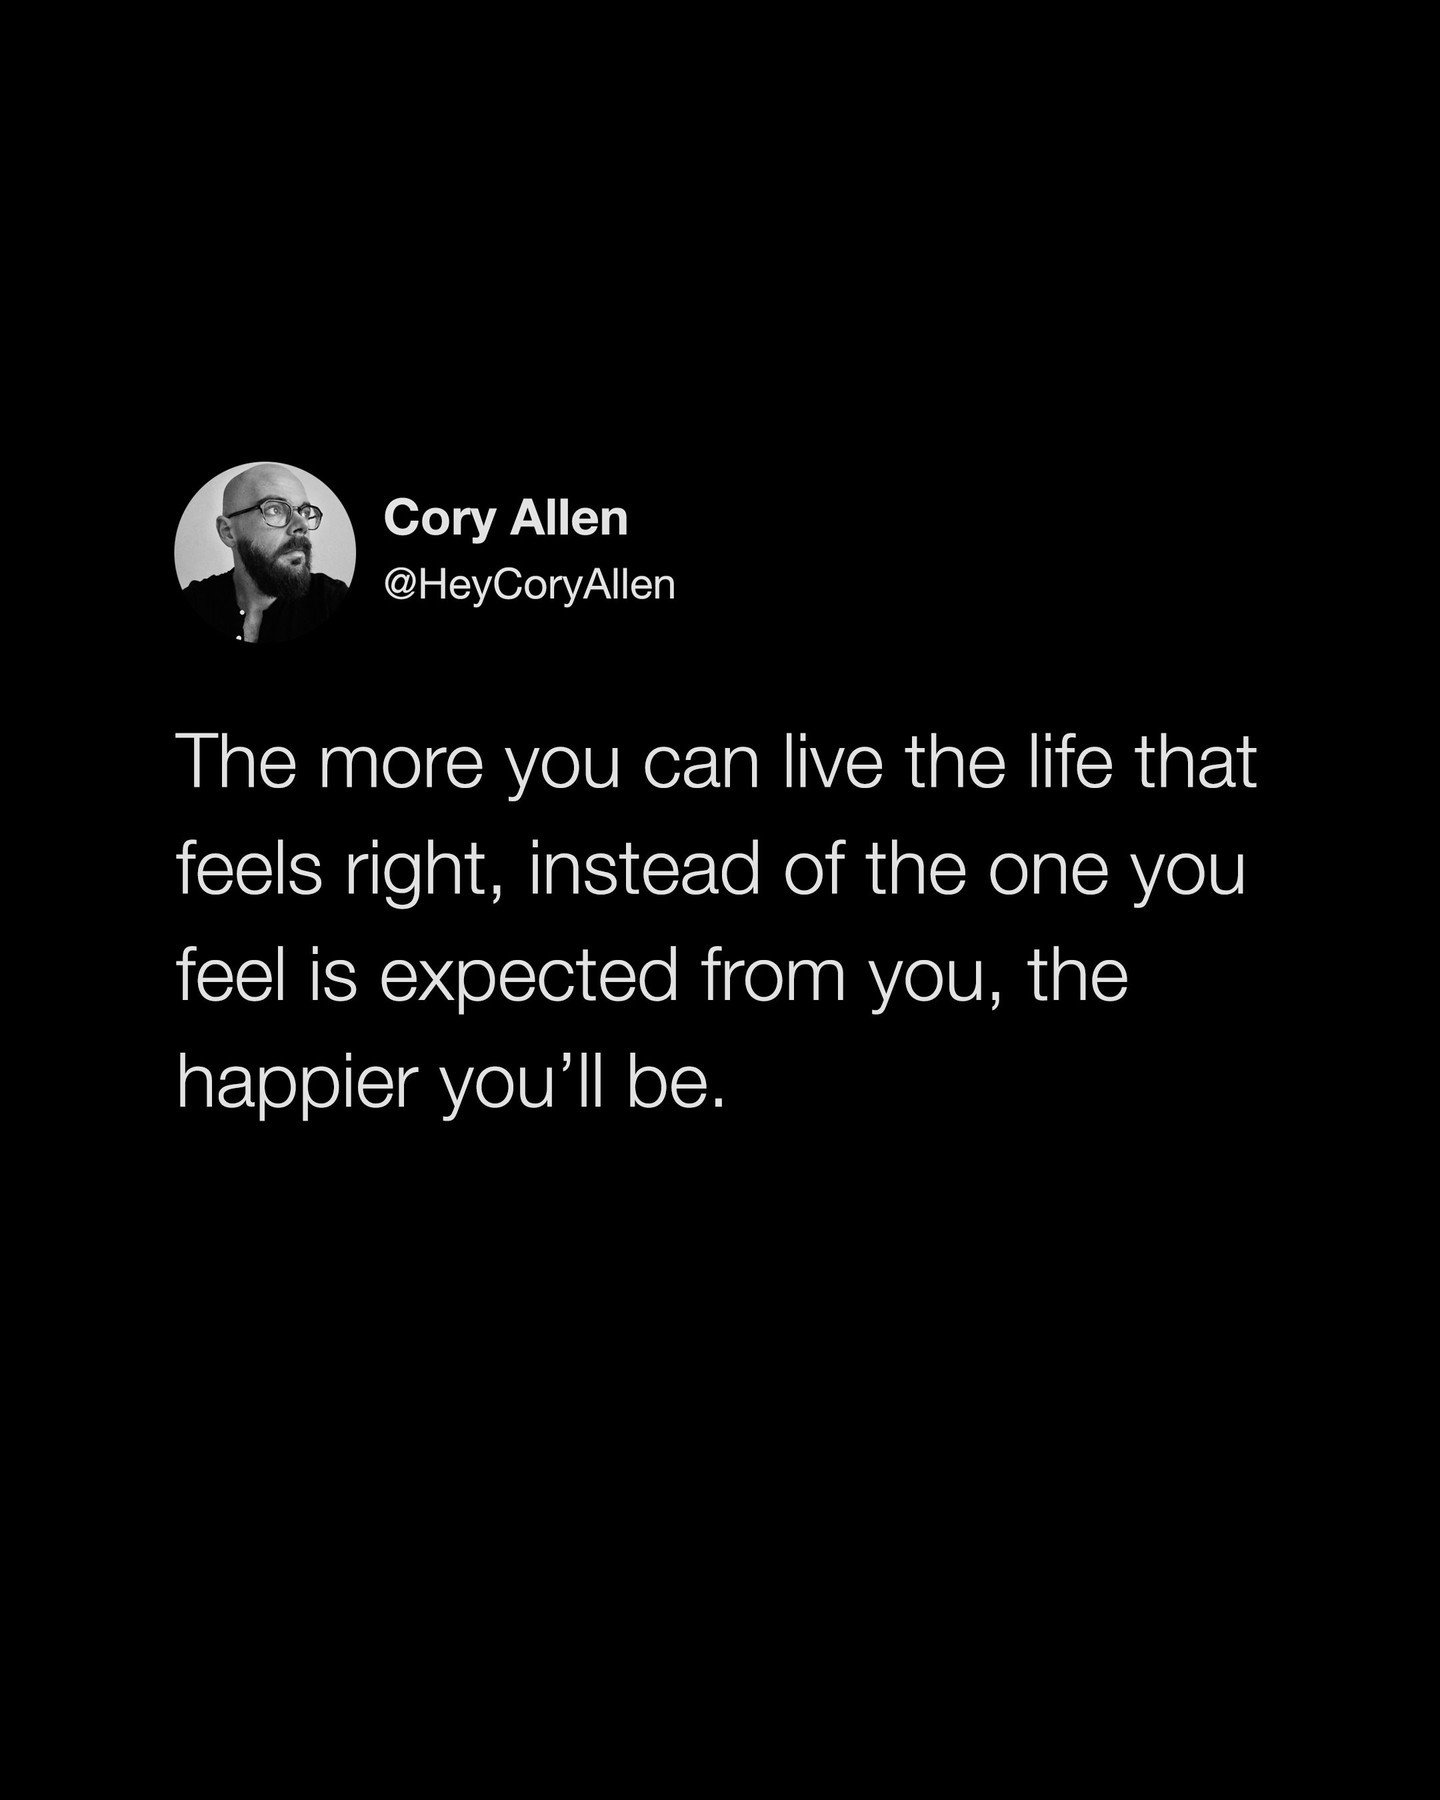 Focusing on what&rsquo;s meaningful to you, instead of what you think is meaningful to others, is how you tap into the energy that will raise up your whole life.

@heycoryallen: &ldquo;The more you can live the life that feels right, instead of the o